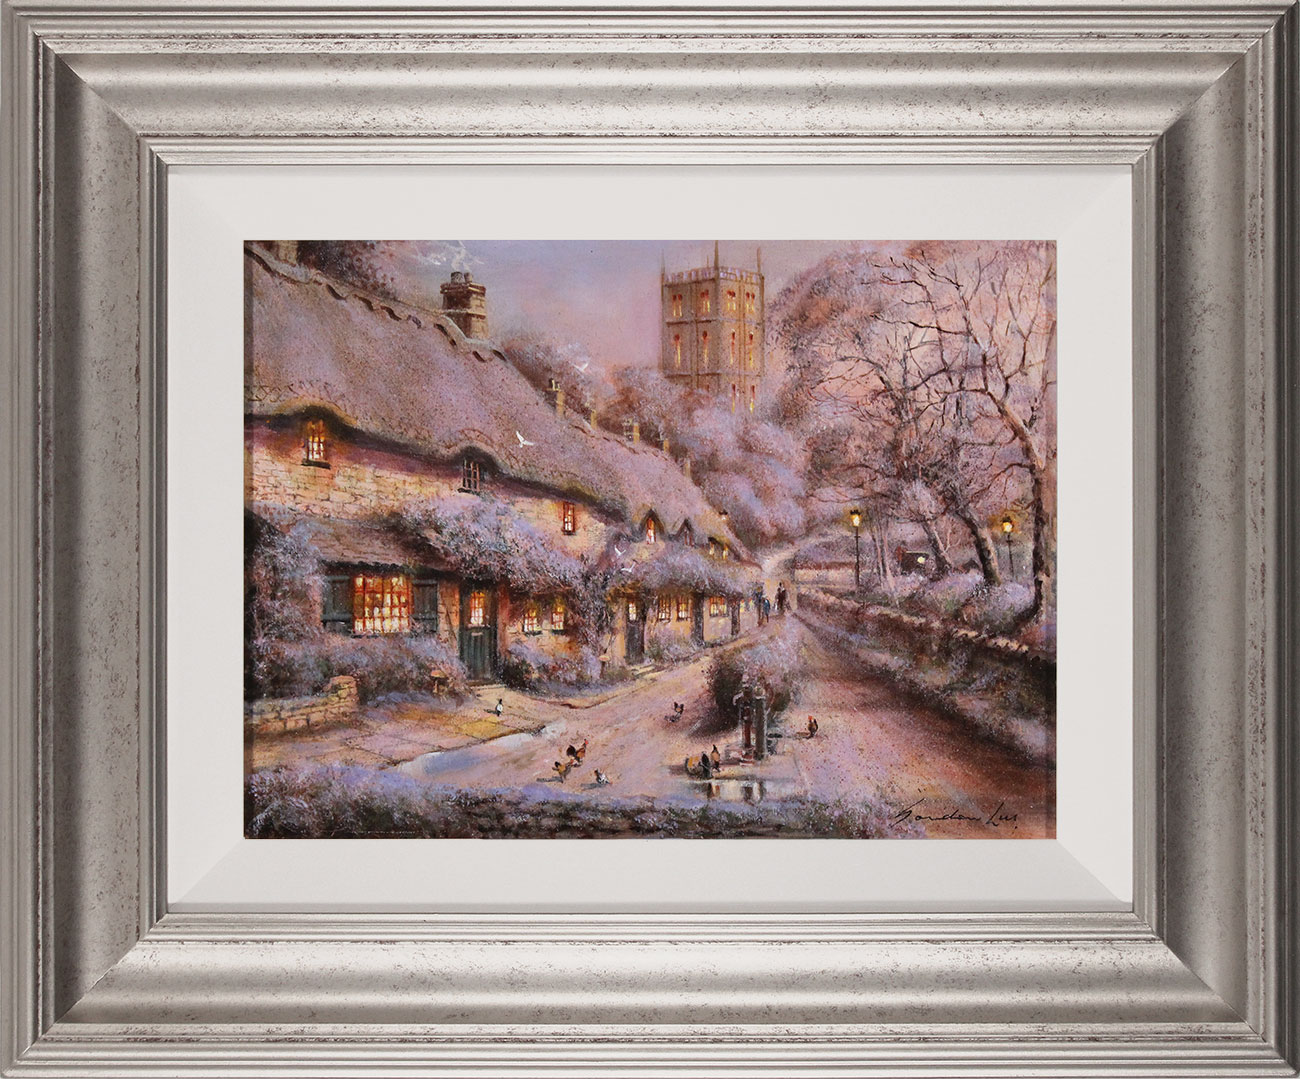 Gordon Lees, Original oil painting on canvas, Evening Snow in Chipping Campden, click to enlarge